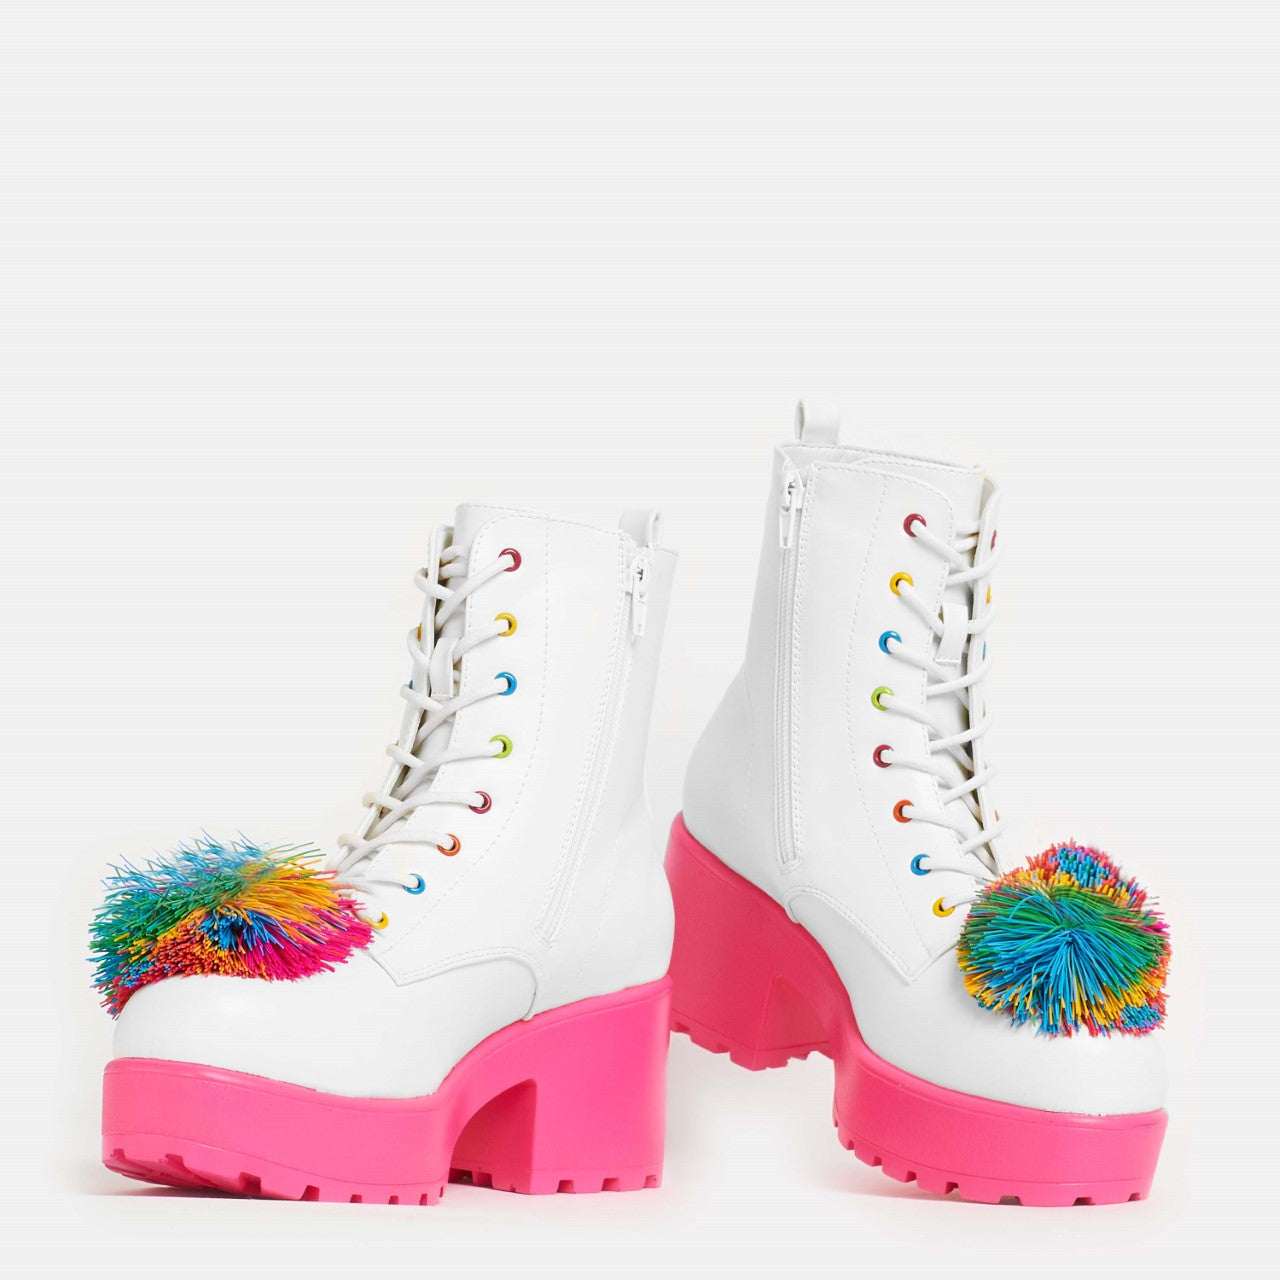 Ghost Pepper Party Multi Fun Ball Boots - Ankle Boots - KOI Footwear - White - Side and Front View